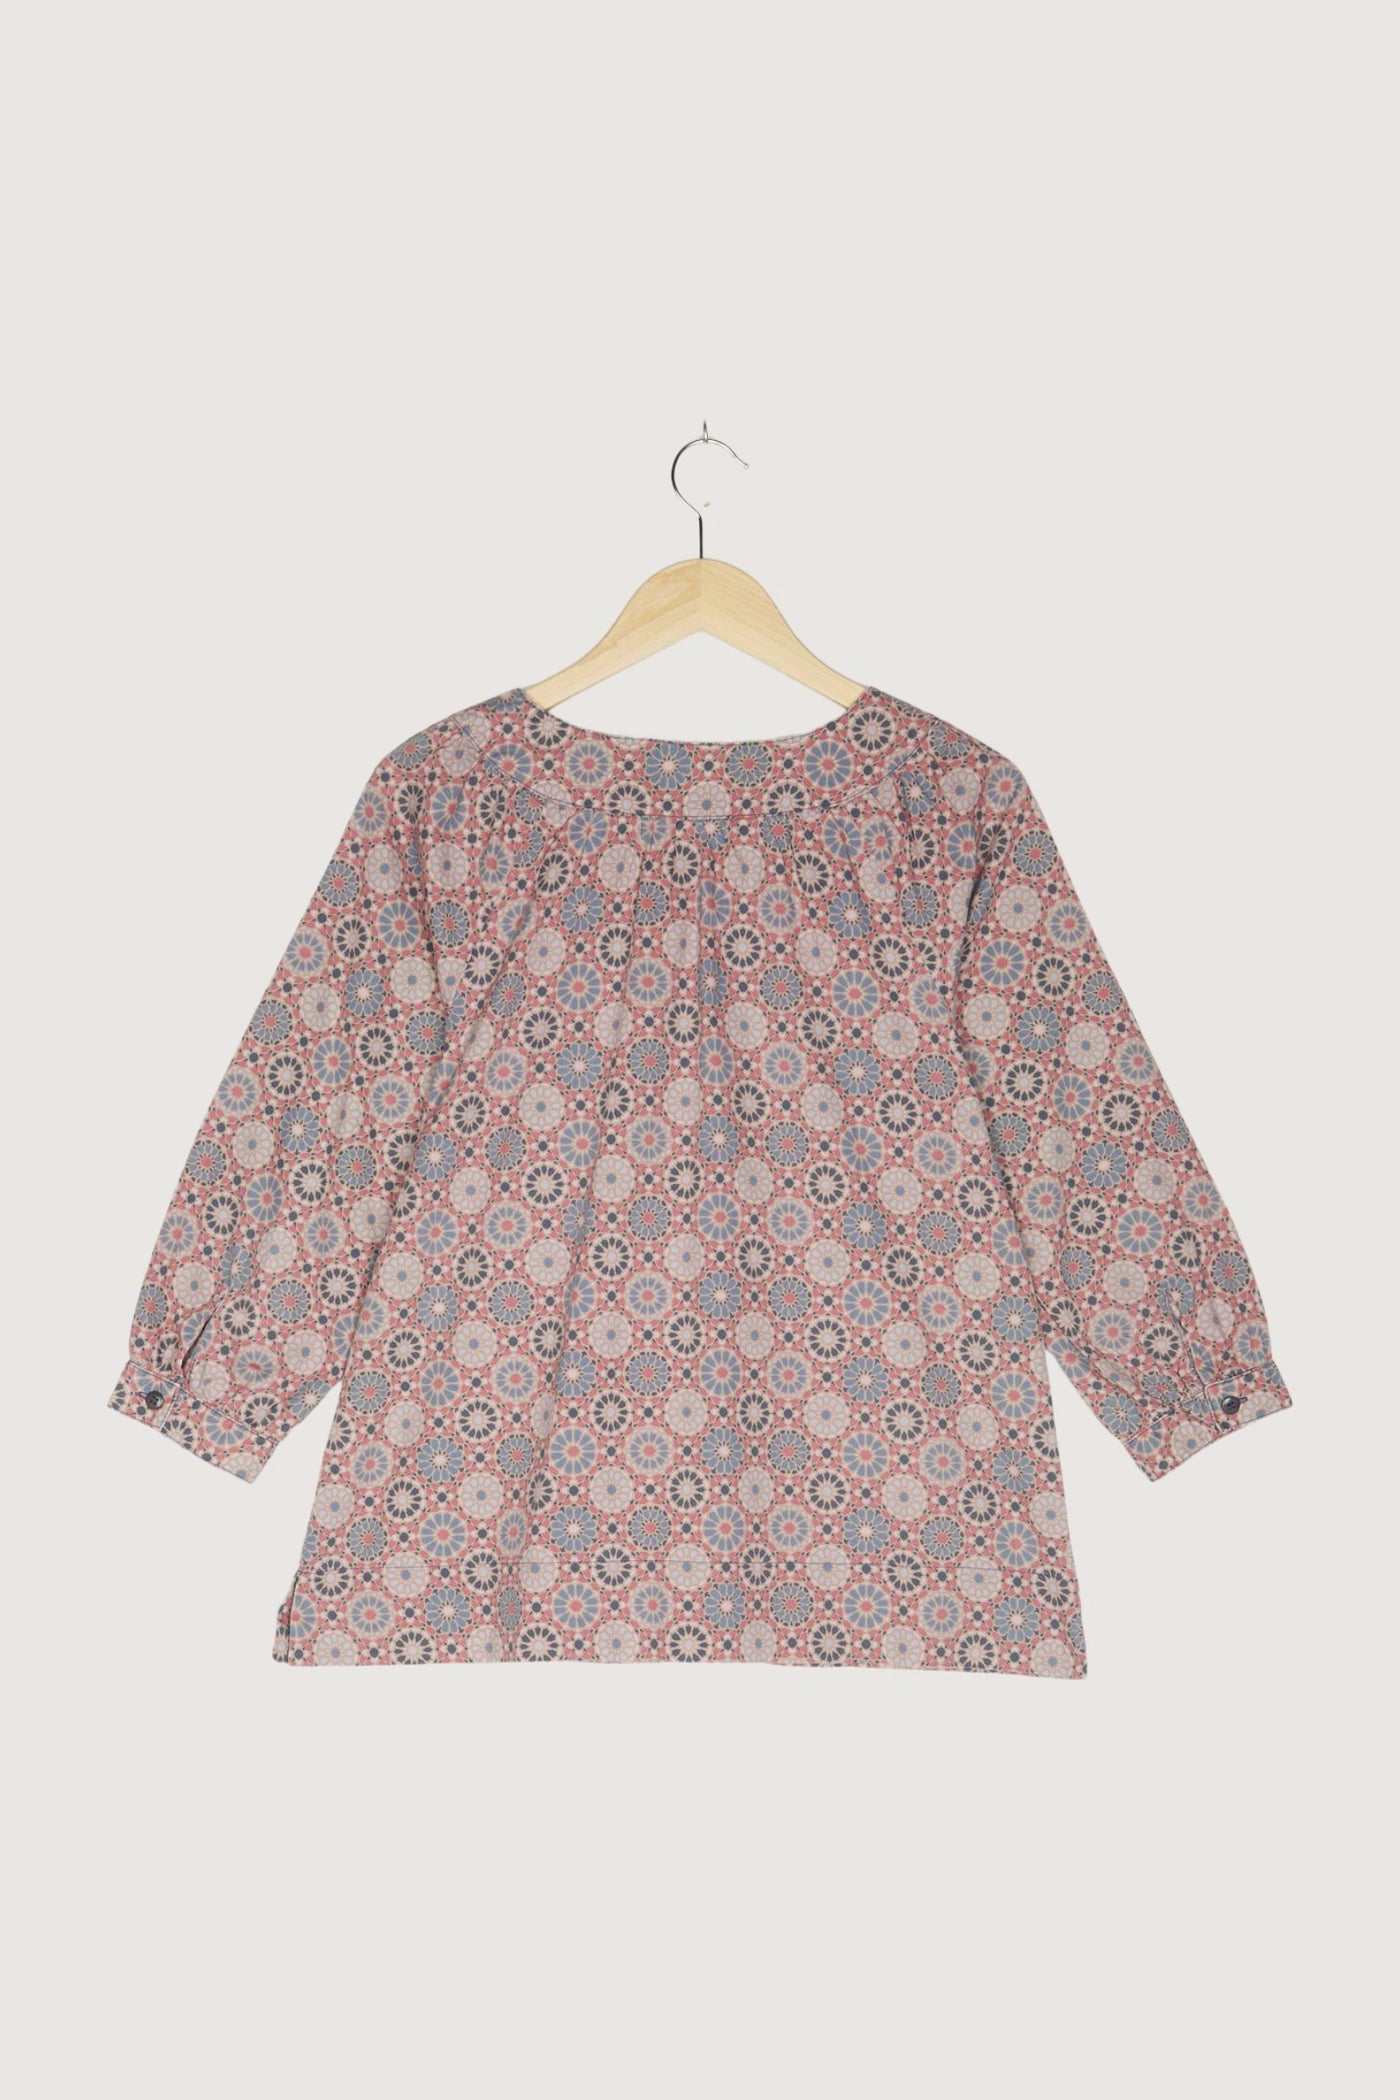 Secondhand Bluse